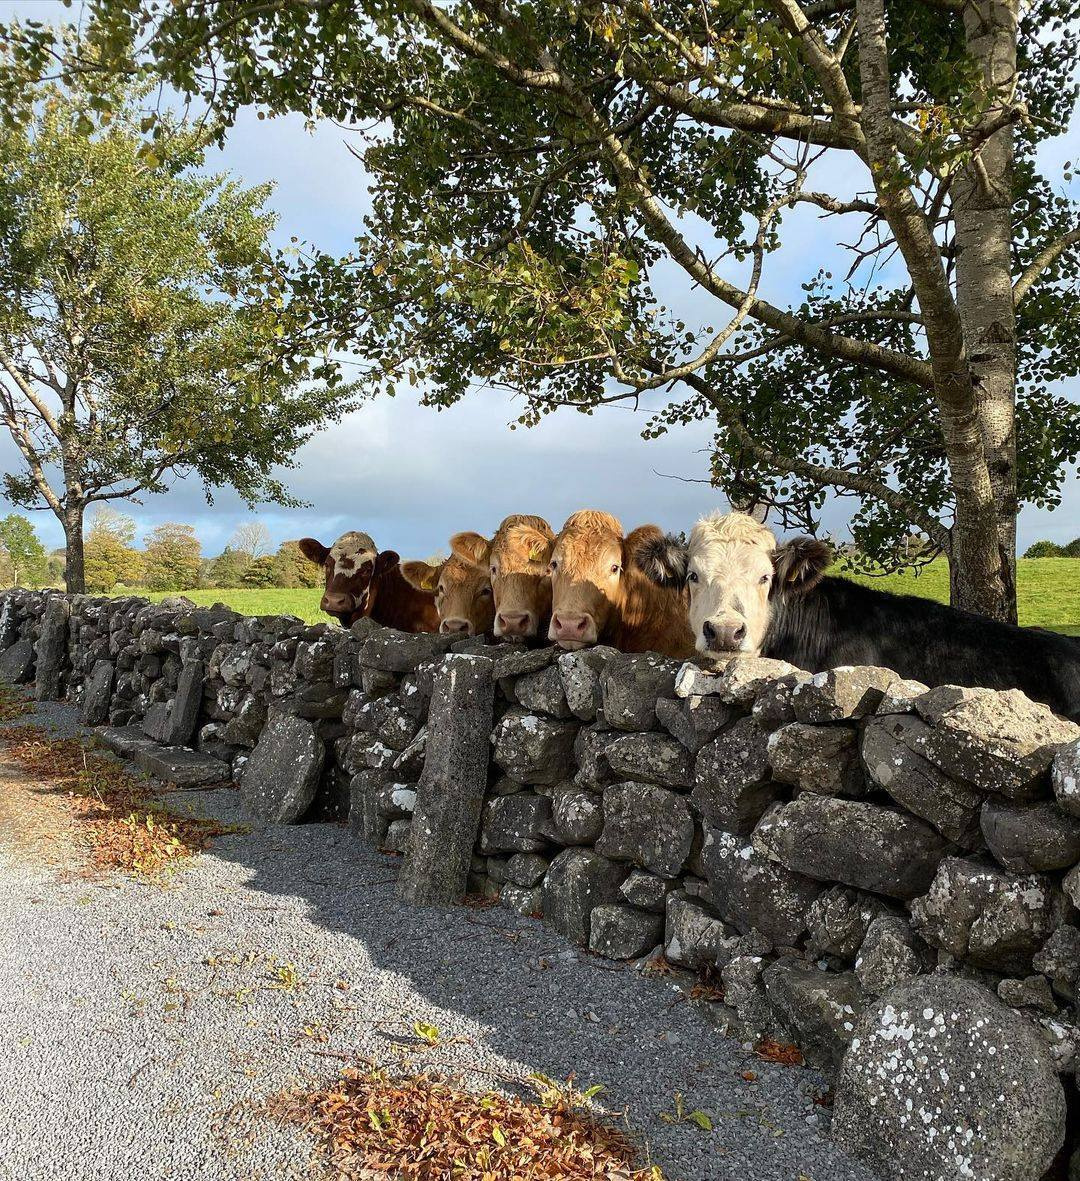 Our cows always know how to strike a pose! 🐮 📍 Kilcheerest, County Galway 📸 @ciarajohanlon (IG) County Galway things to see and do lovetovisitireland.com/county-galway-…